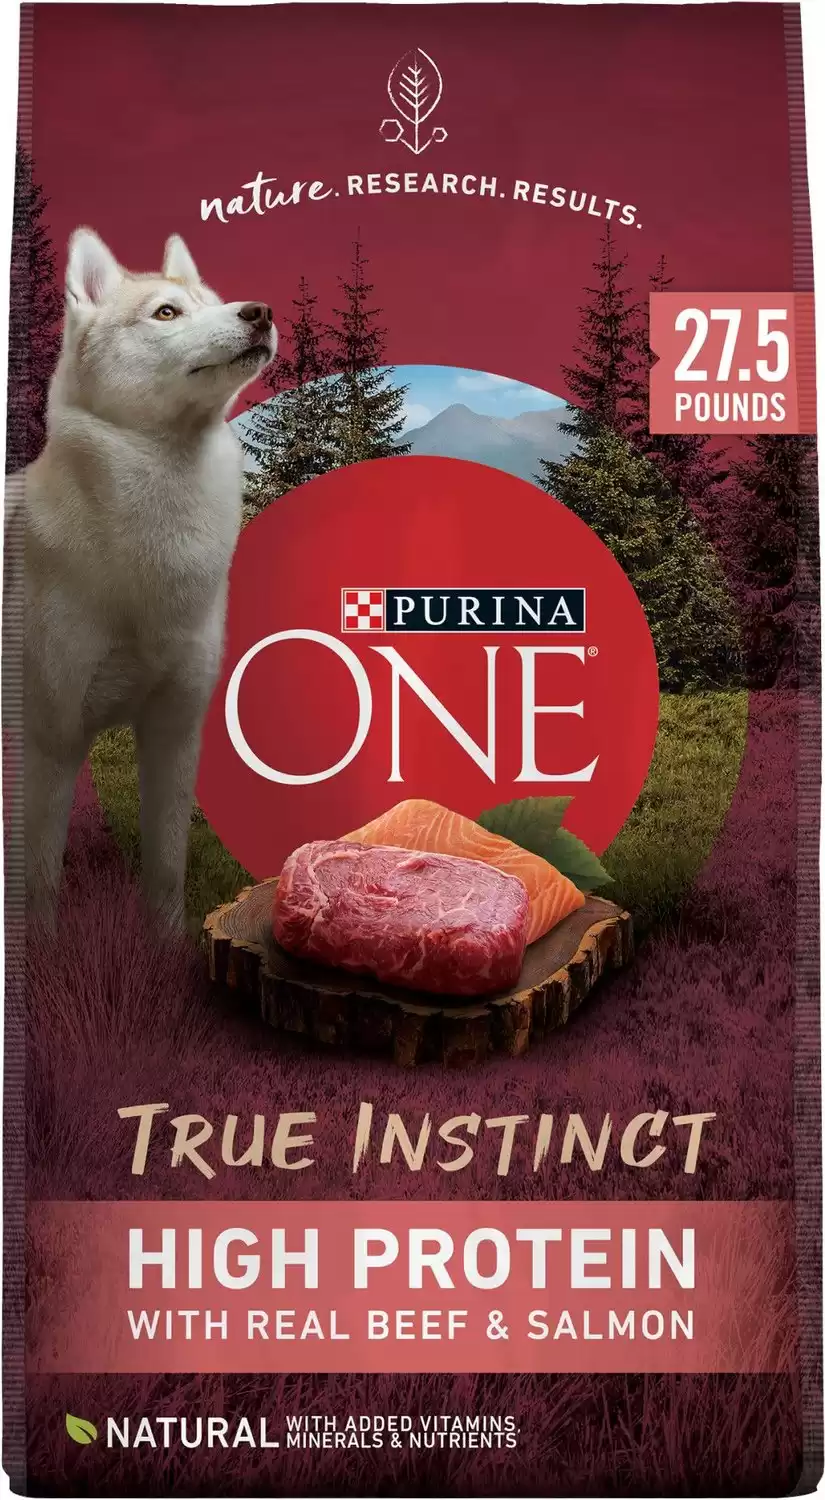 Purina ONE SmartBlend True Instinct Natural High Protein Adult Dry Dog Food